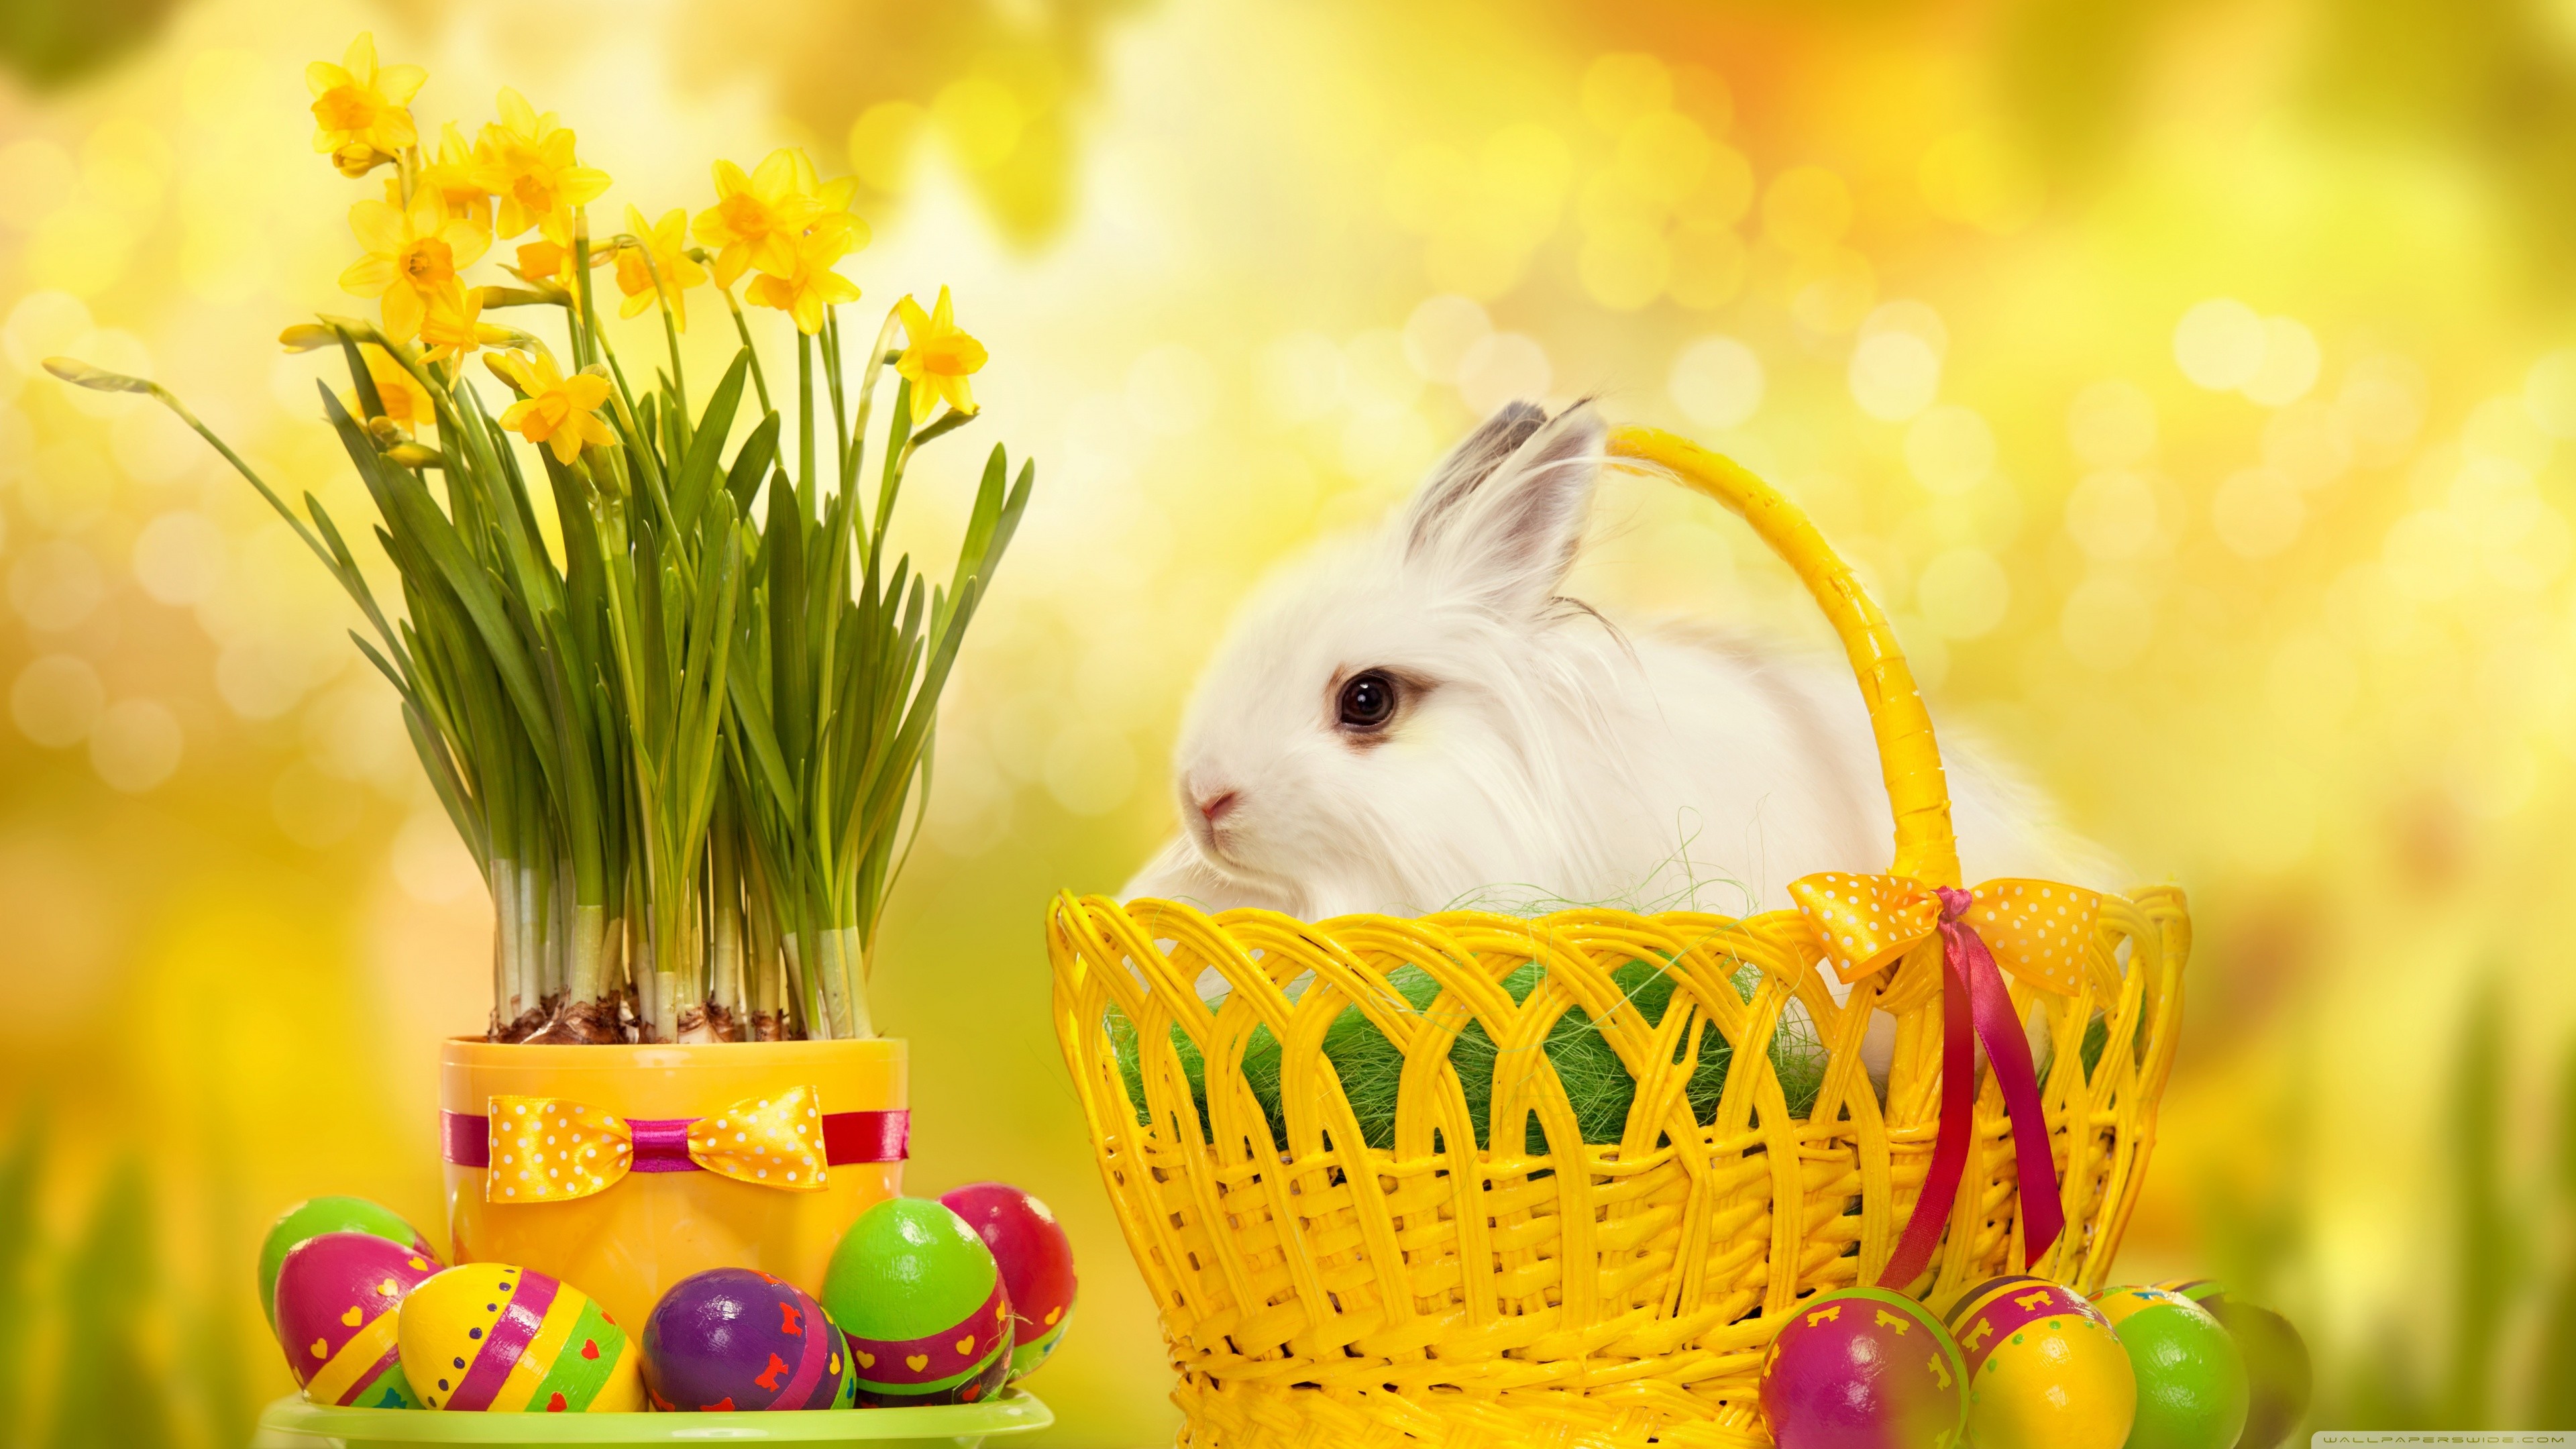 Cute Easter Bunny Wallpaper 58 images 